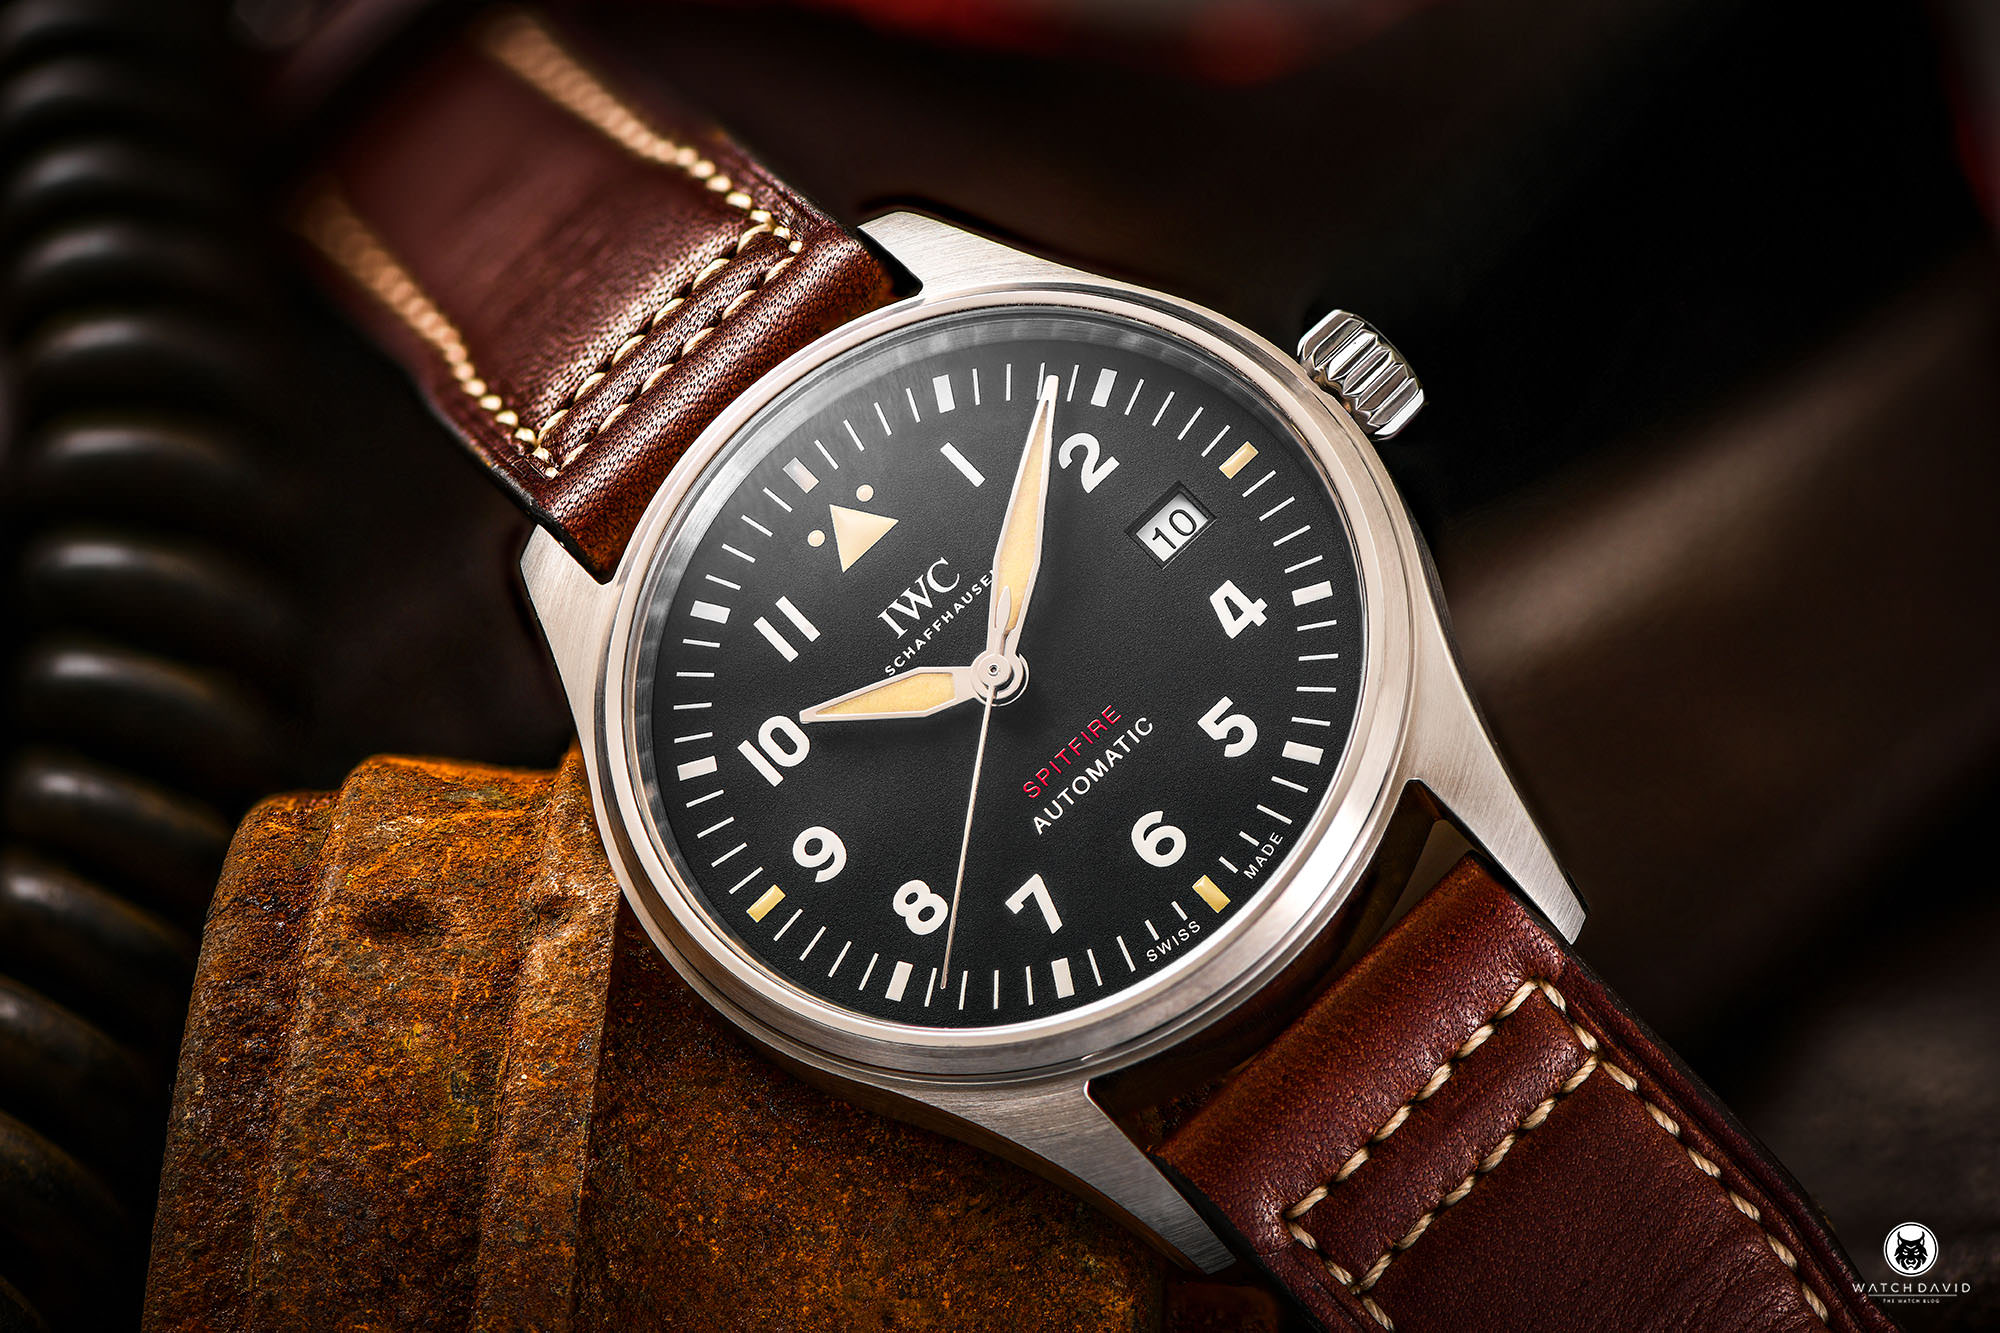 Iwc spitfire review